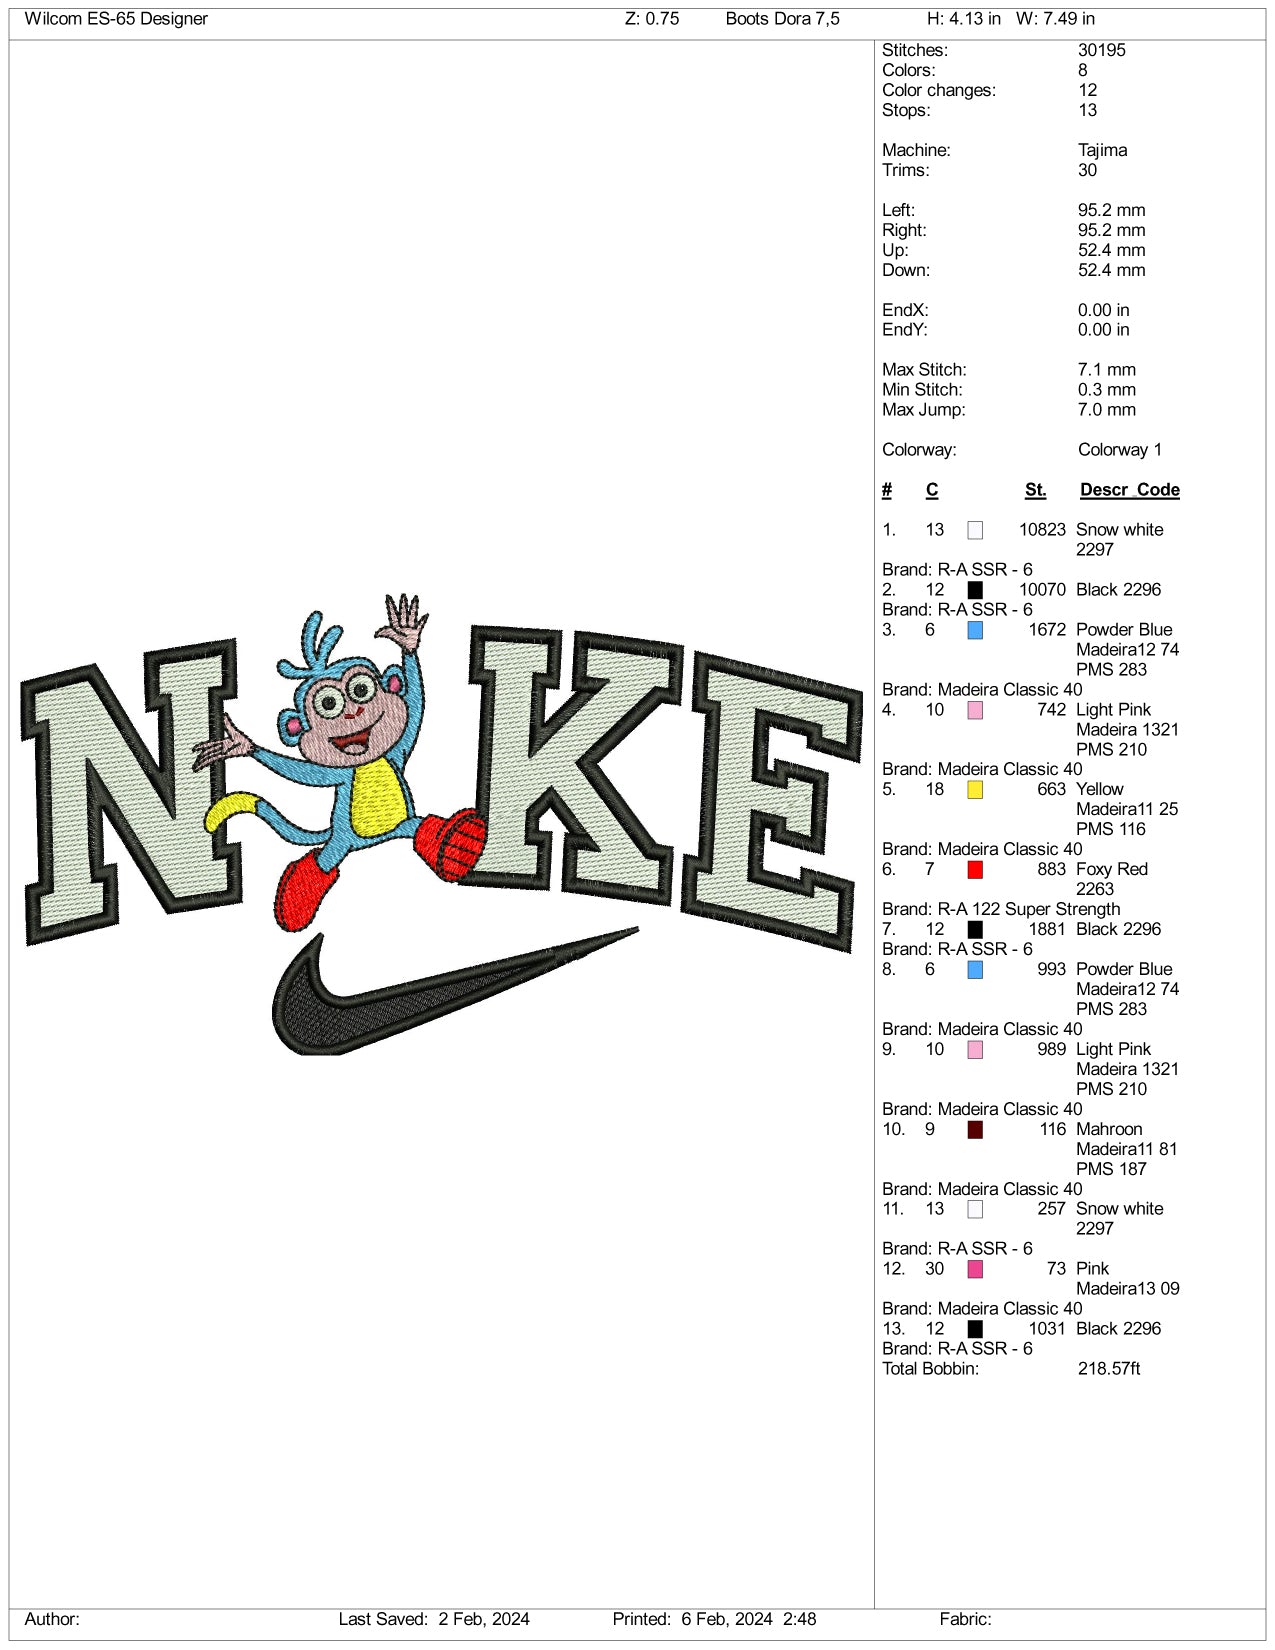 Nike Boots Embroidery Design Files - 3 Size's